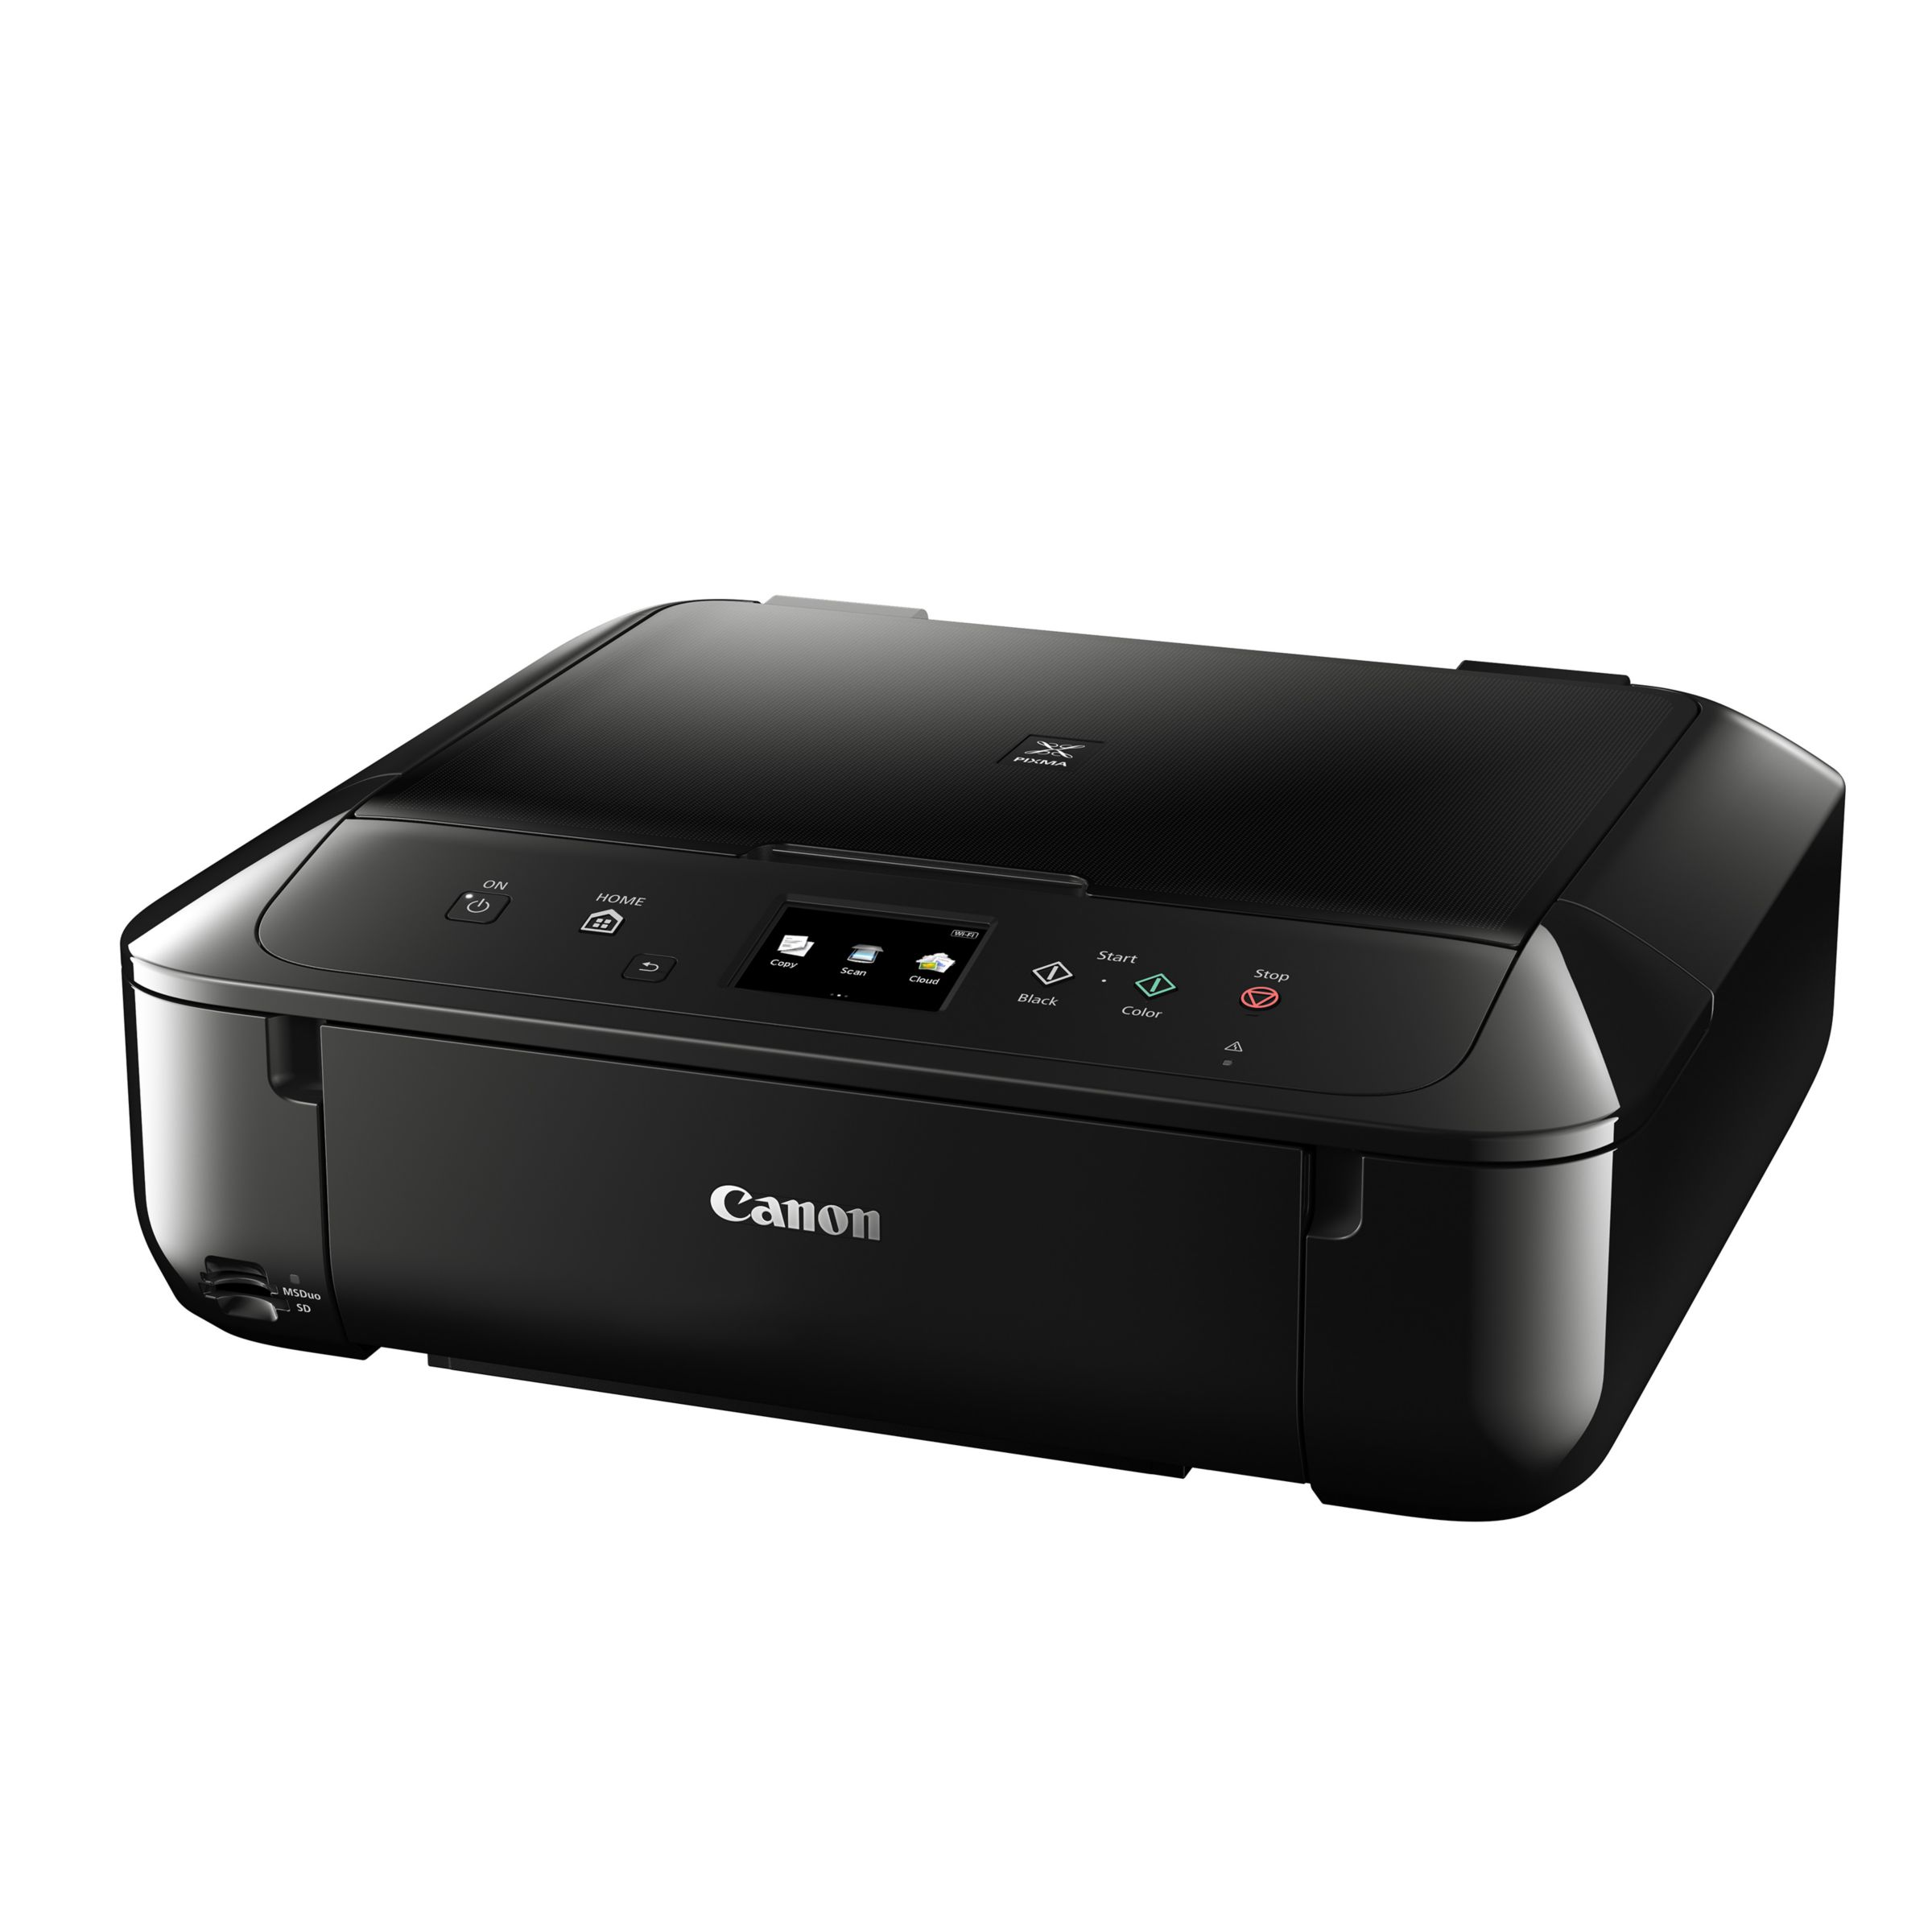 Canon Pixma Mg6850 All In One Wireless Wi Fi Printer With Colour Touch Screen At John Lewis Partners